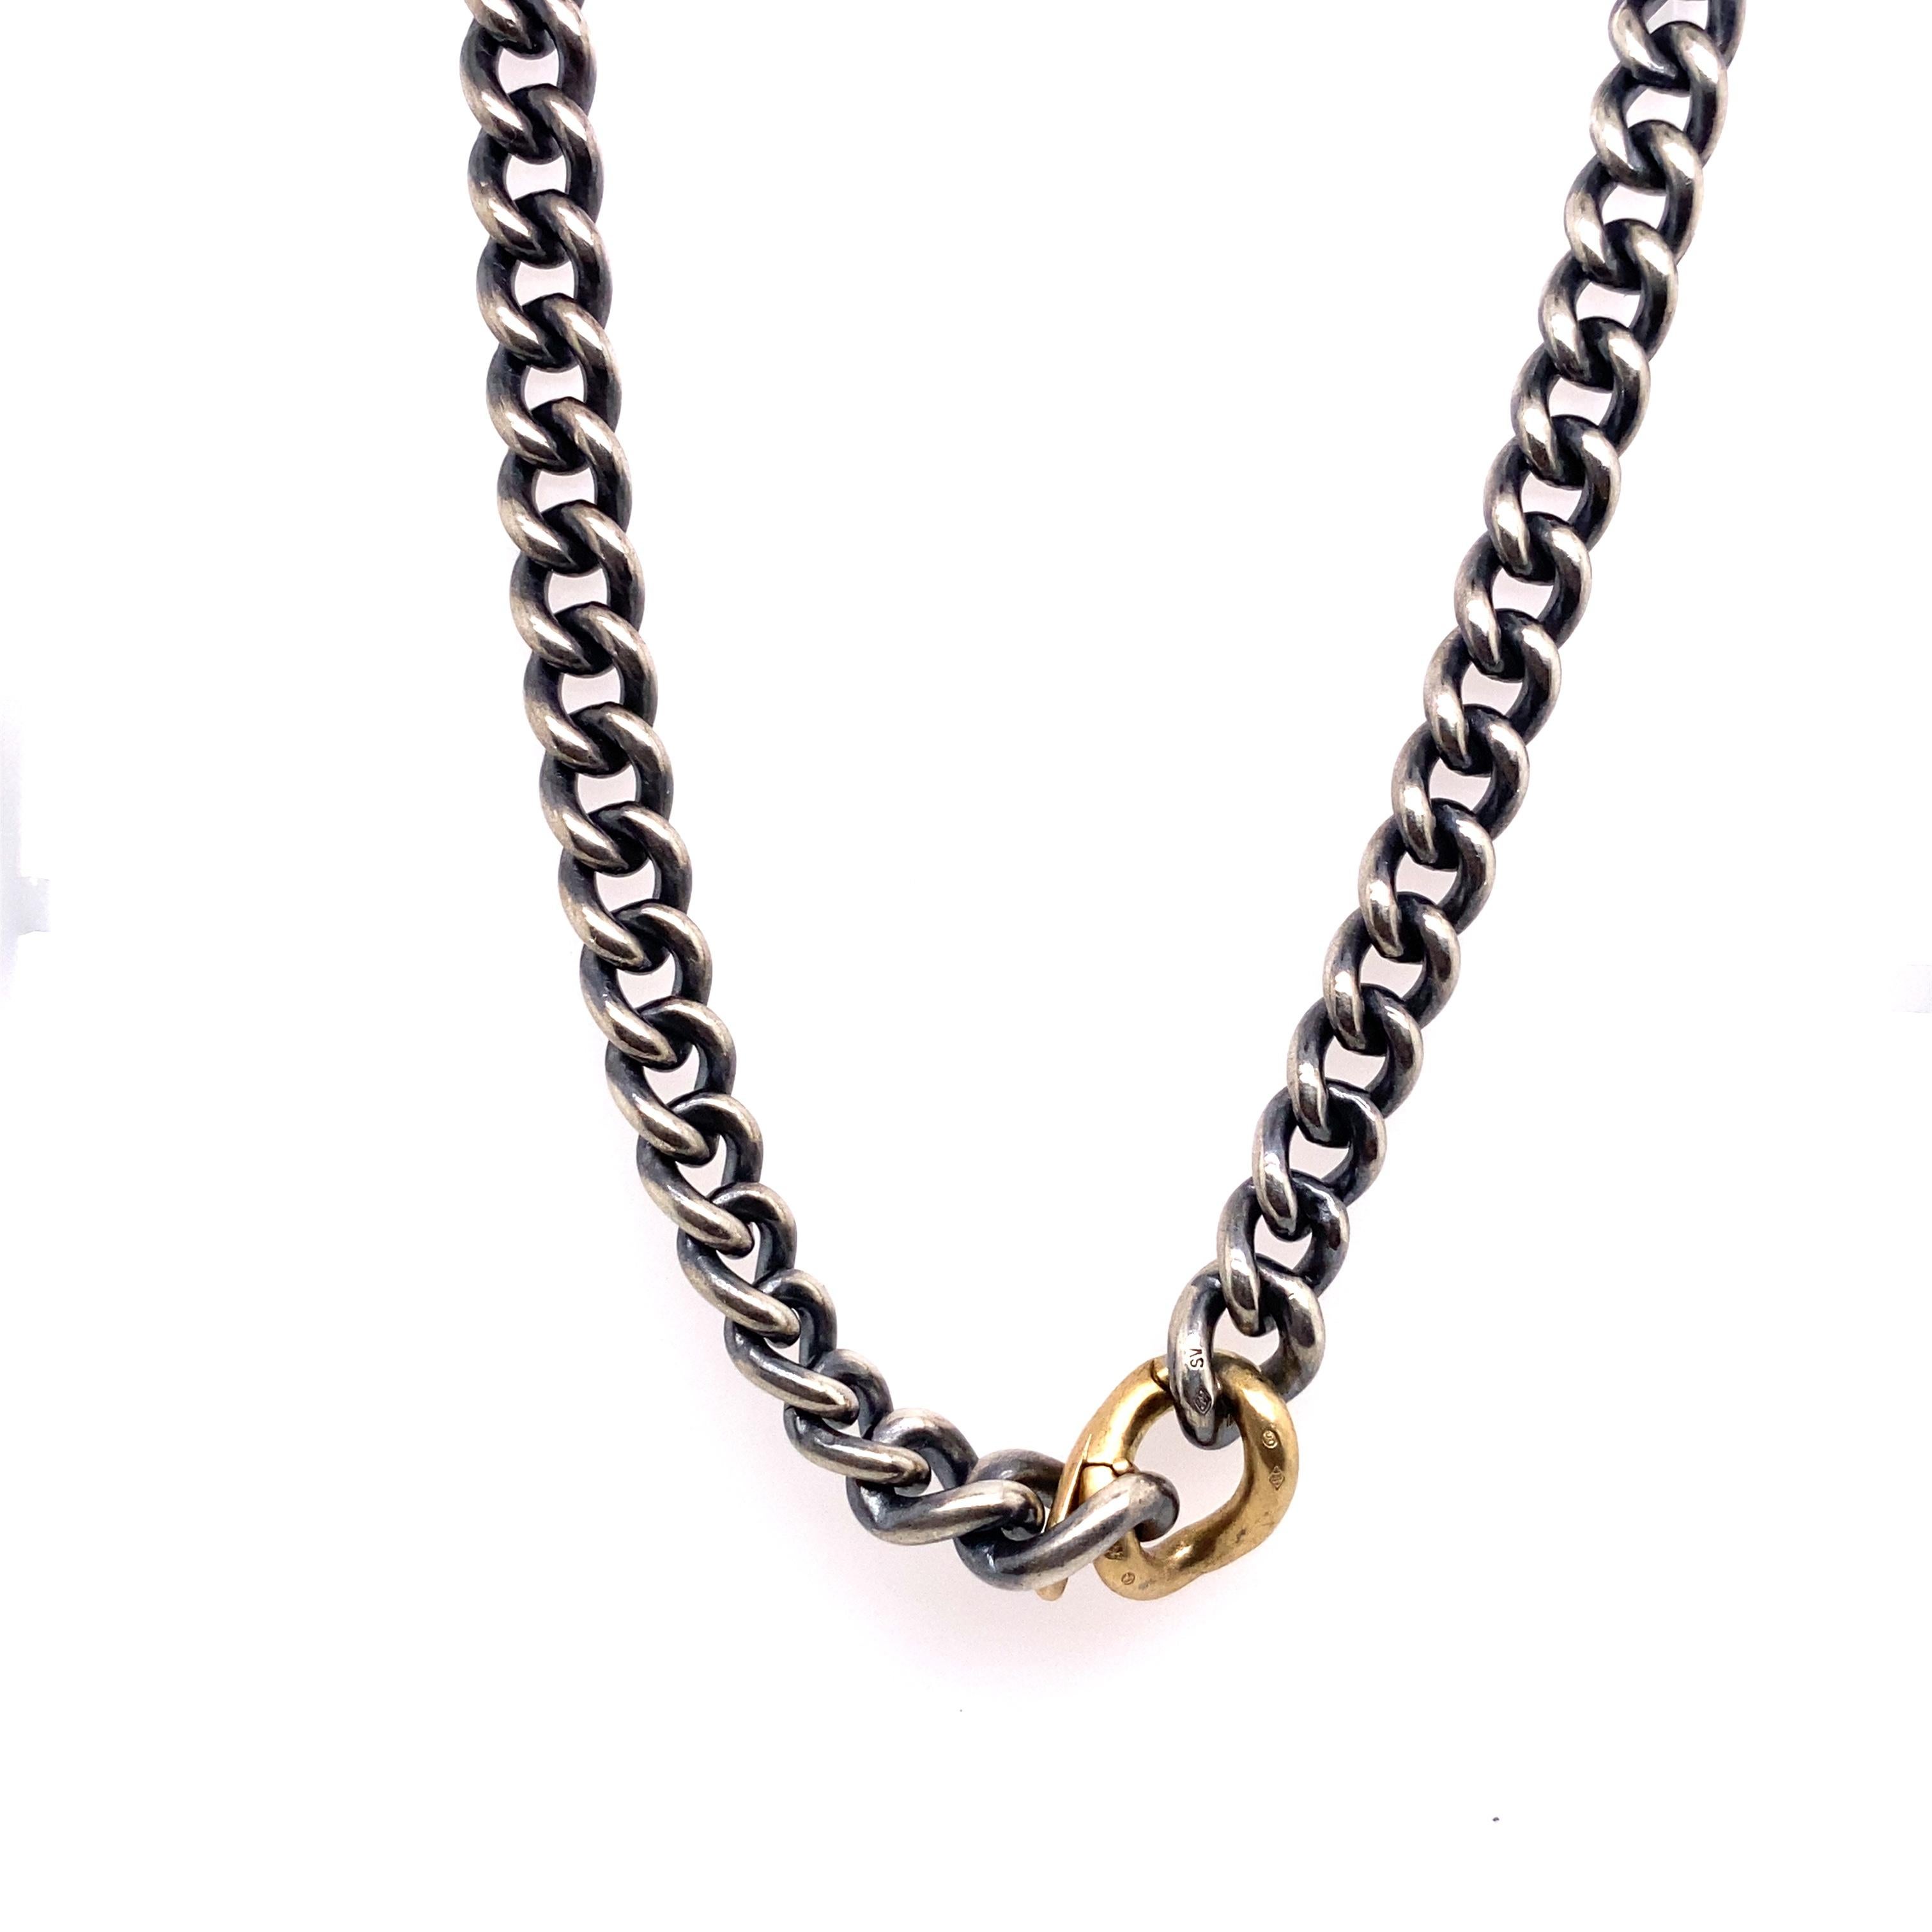 A quality piece of jewellery, this HUM curb chain necklace is an elegant and stylish addition to any outfit. 
It features an 18ct gold and silver curb chain design.
Total Weight: 82.3g
Width of Chain: 8mm
Necklace Length: 18